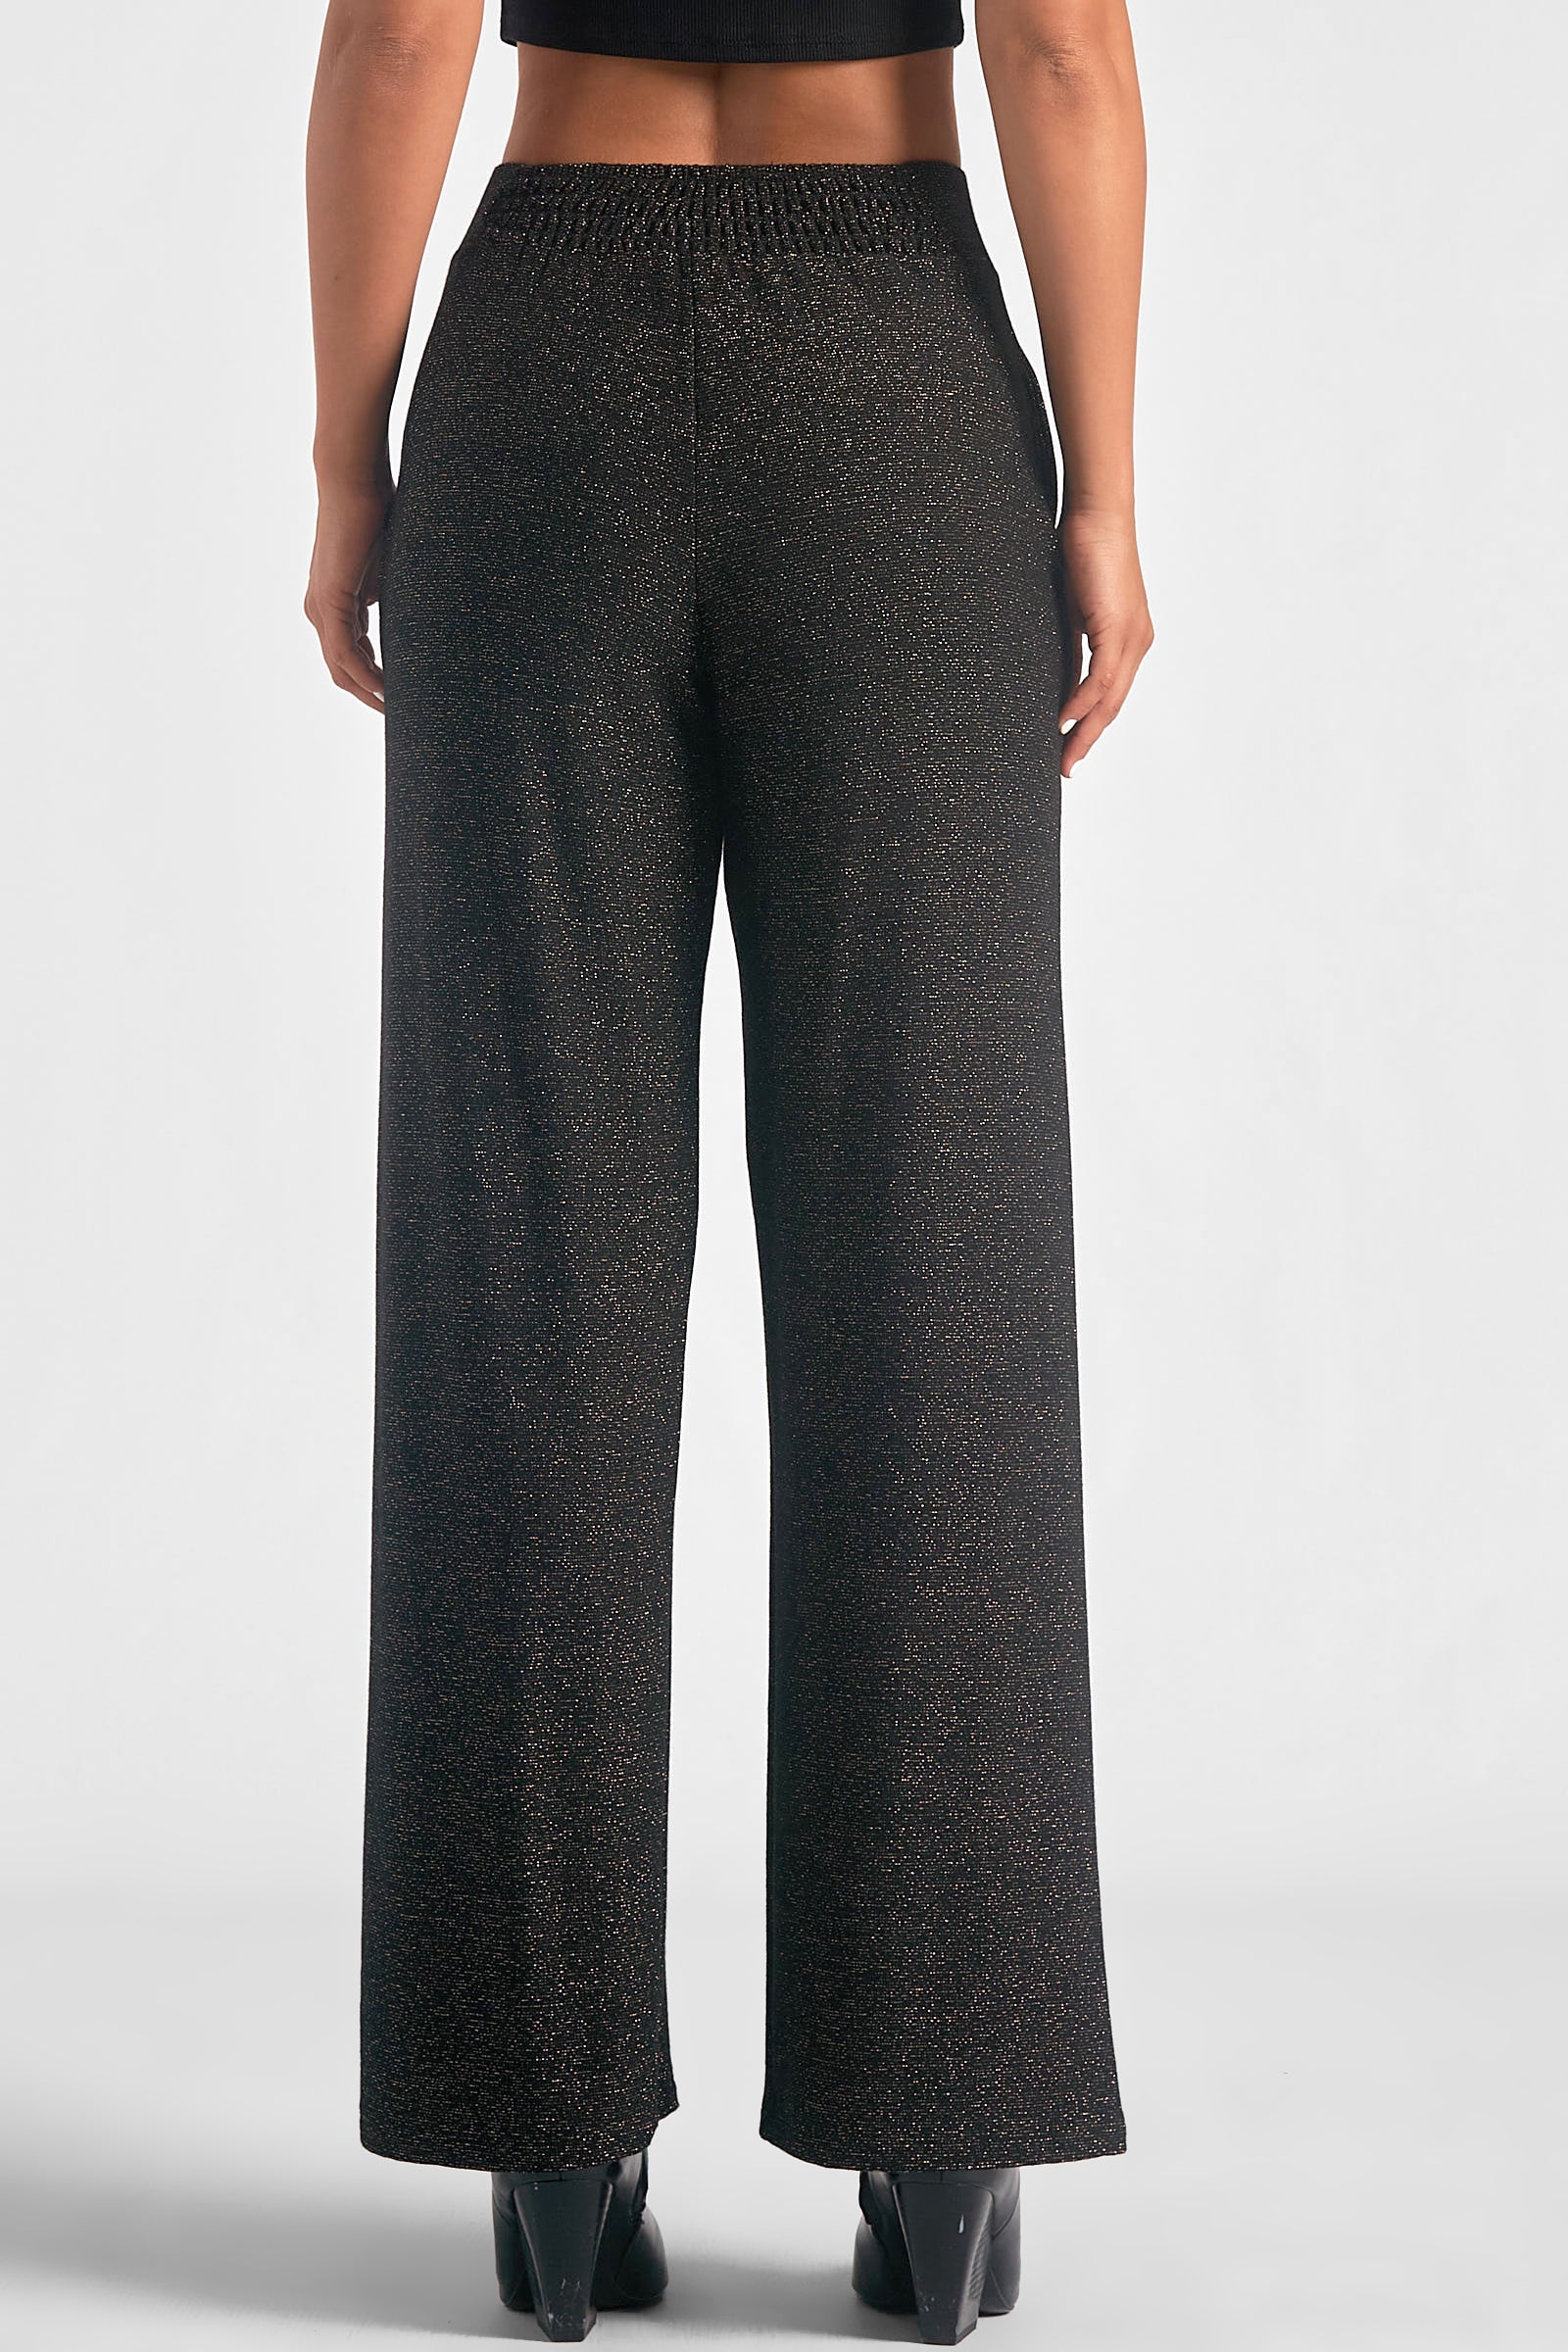 BLACK SEQUIN TROUSERS – PETITE-THE-BRAND